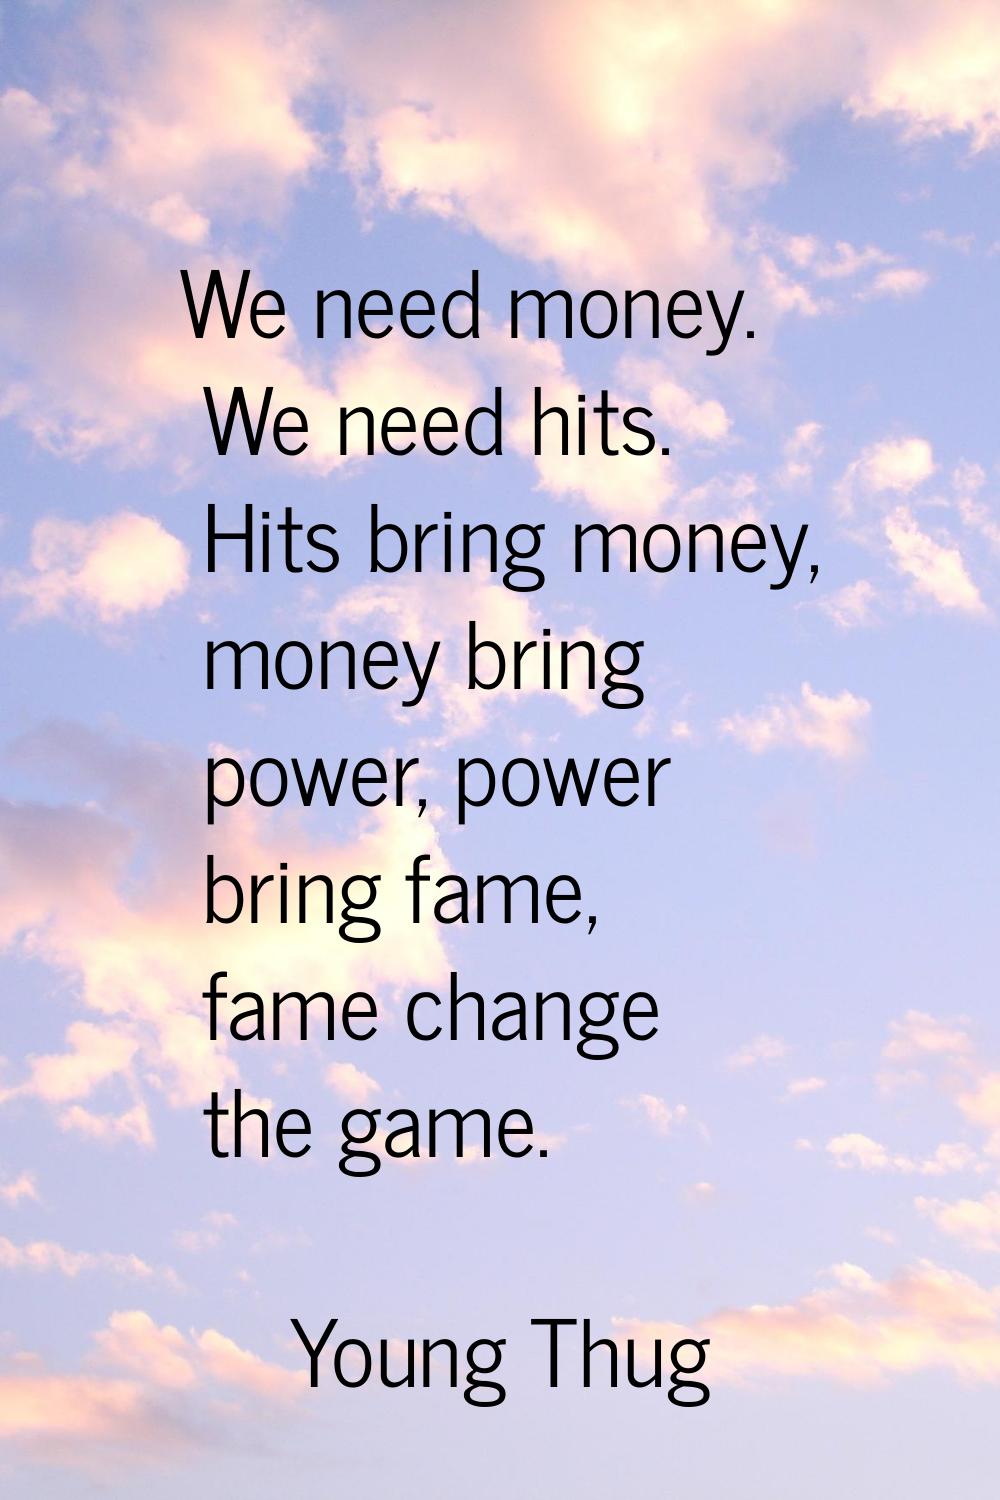 We need money. We need hits. Hits bring money, money bring power, power bring fame, fame change the